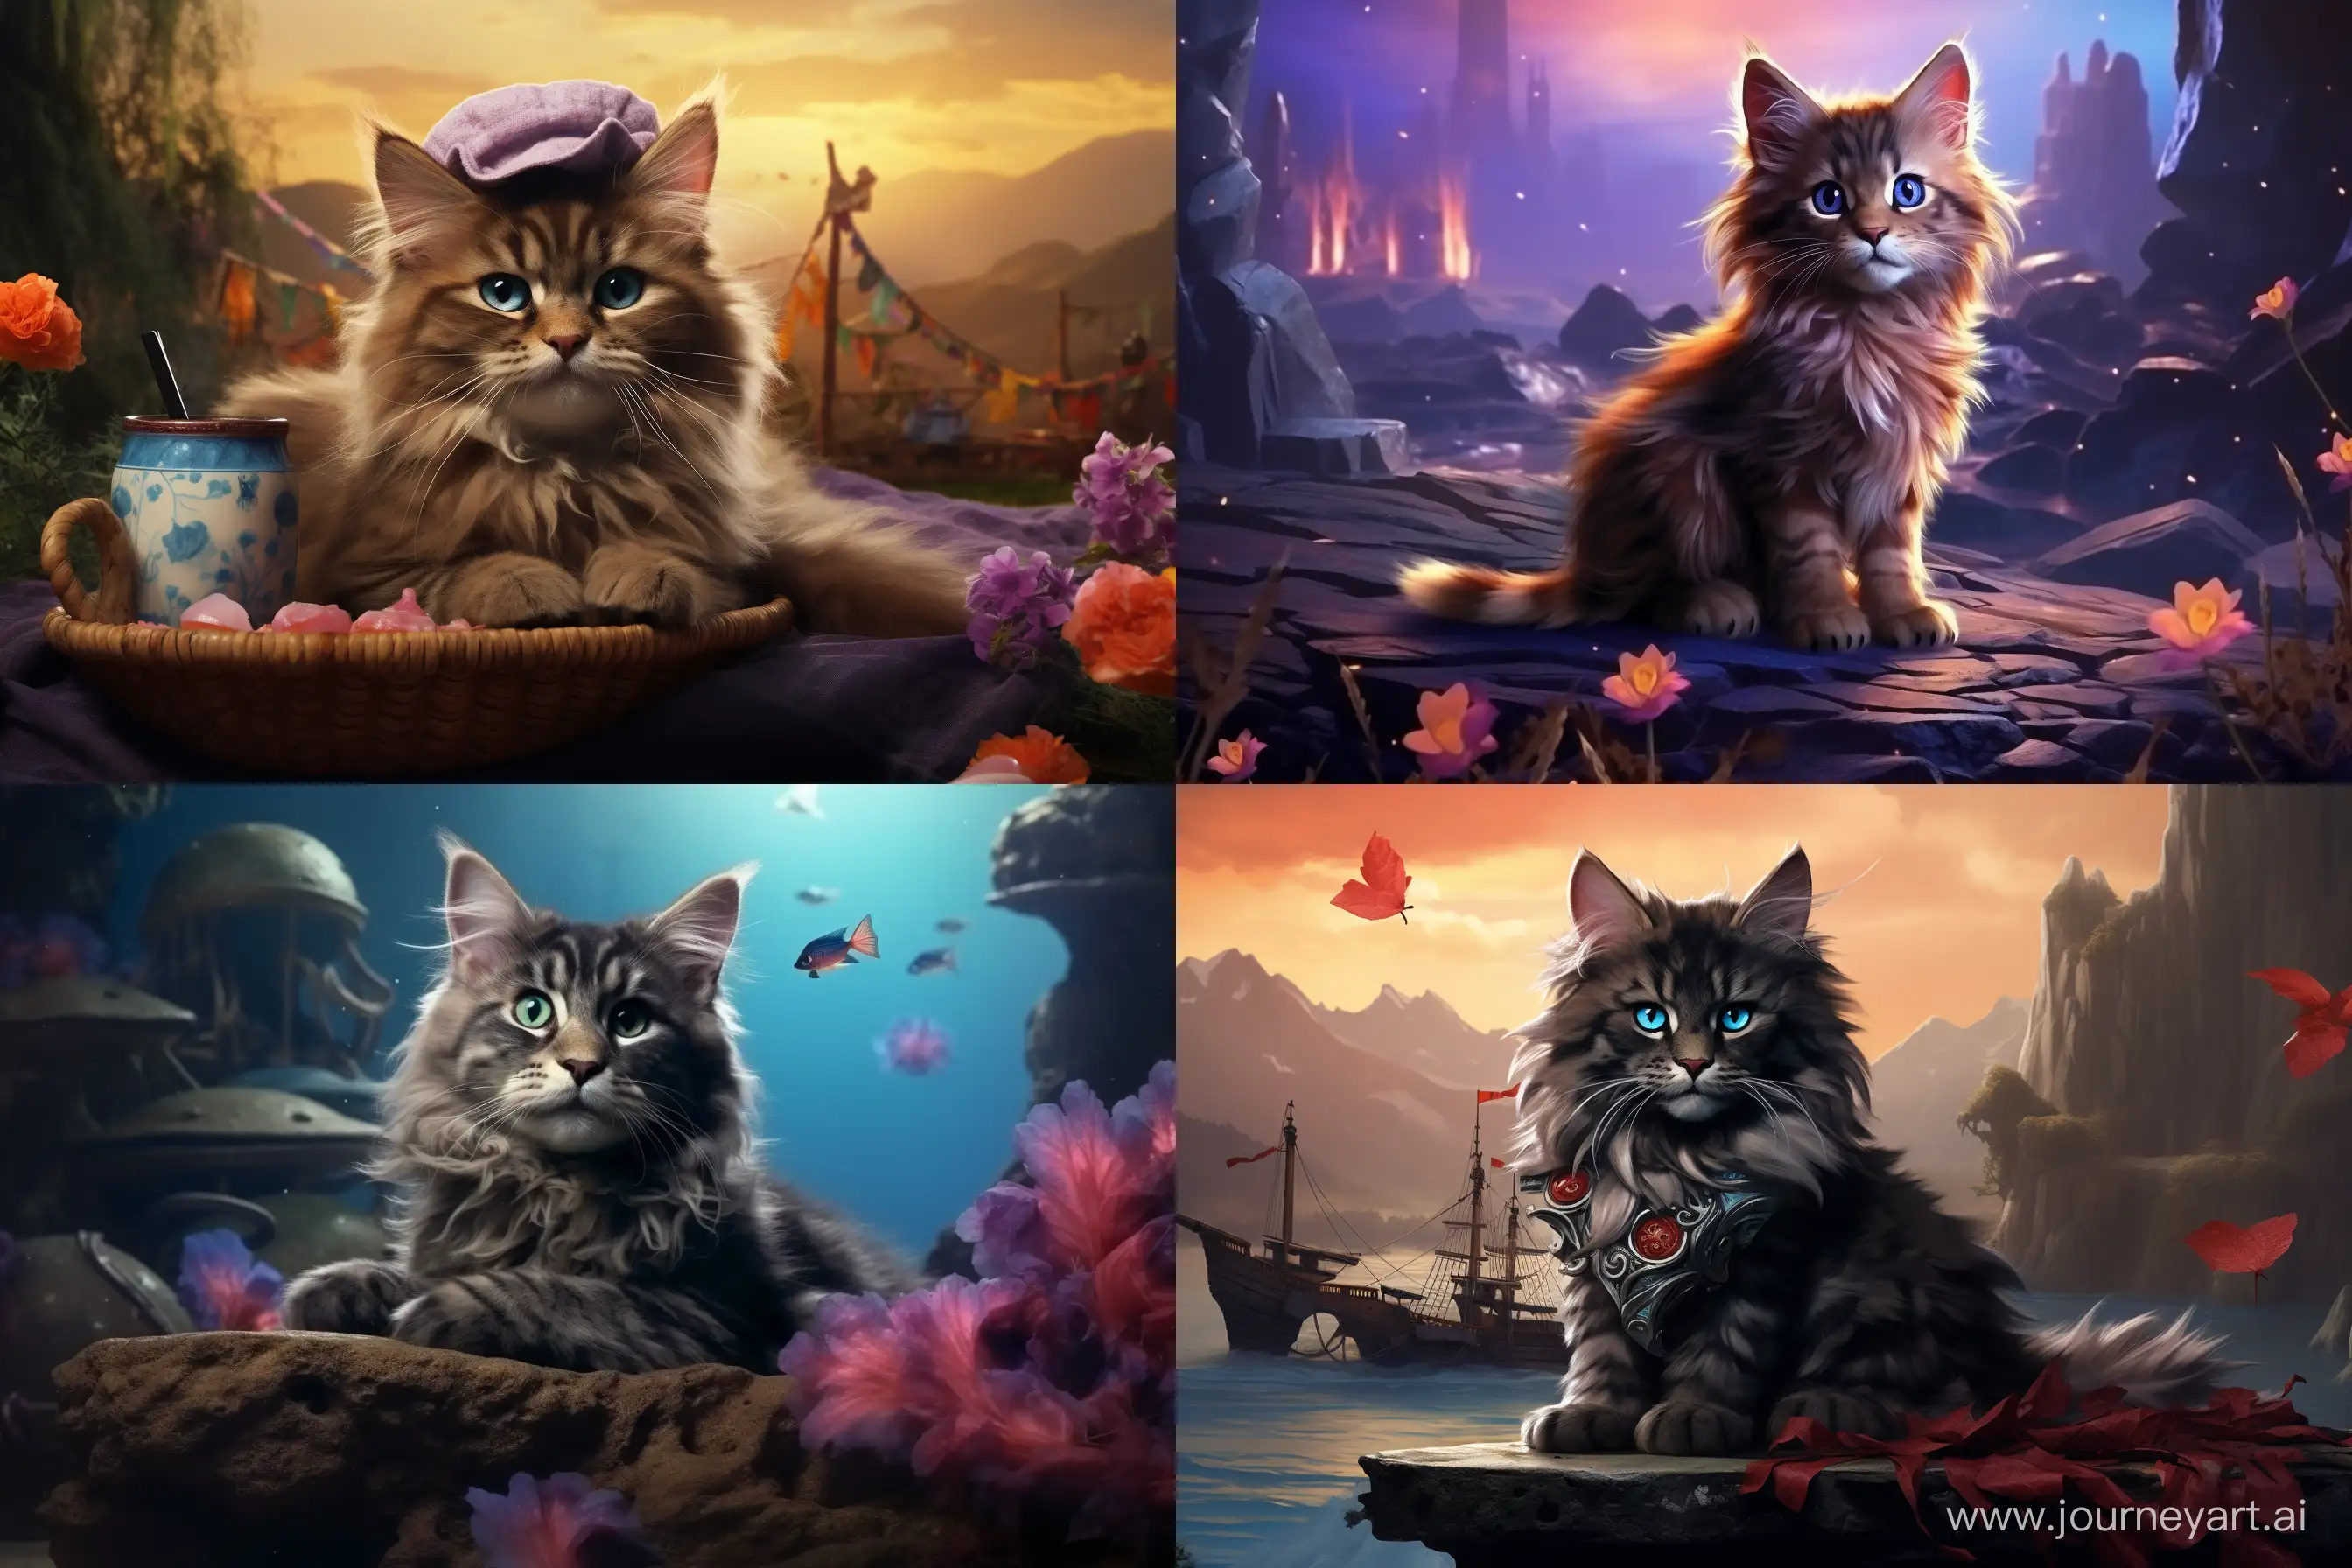 Surrealism: Represents an illustration of a dreamlike and surreal Maine Coon kitten with unexpected elements. --ar 3:2